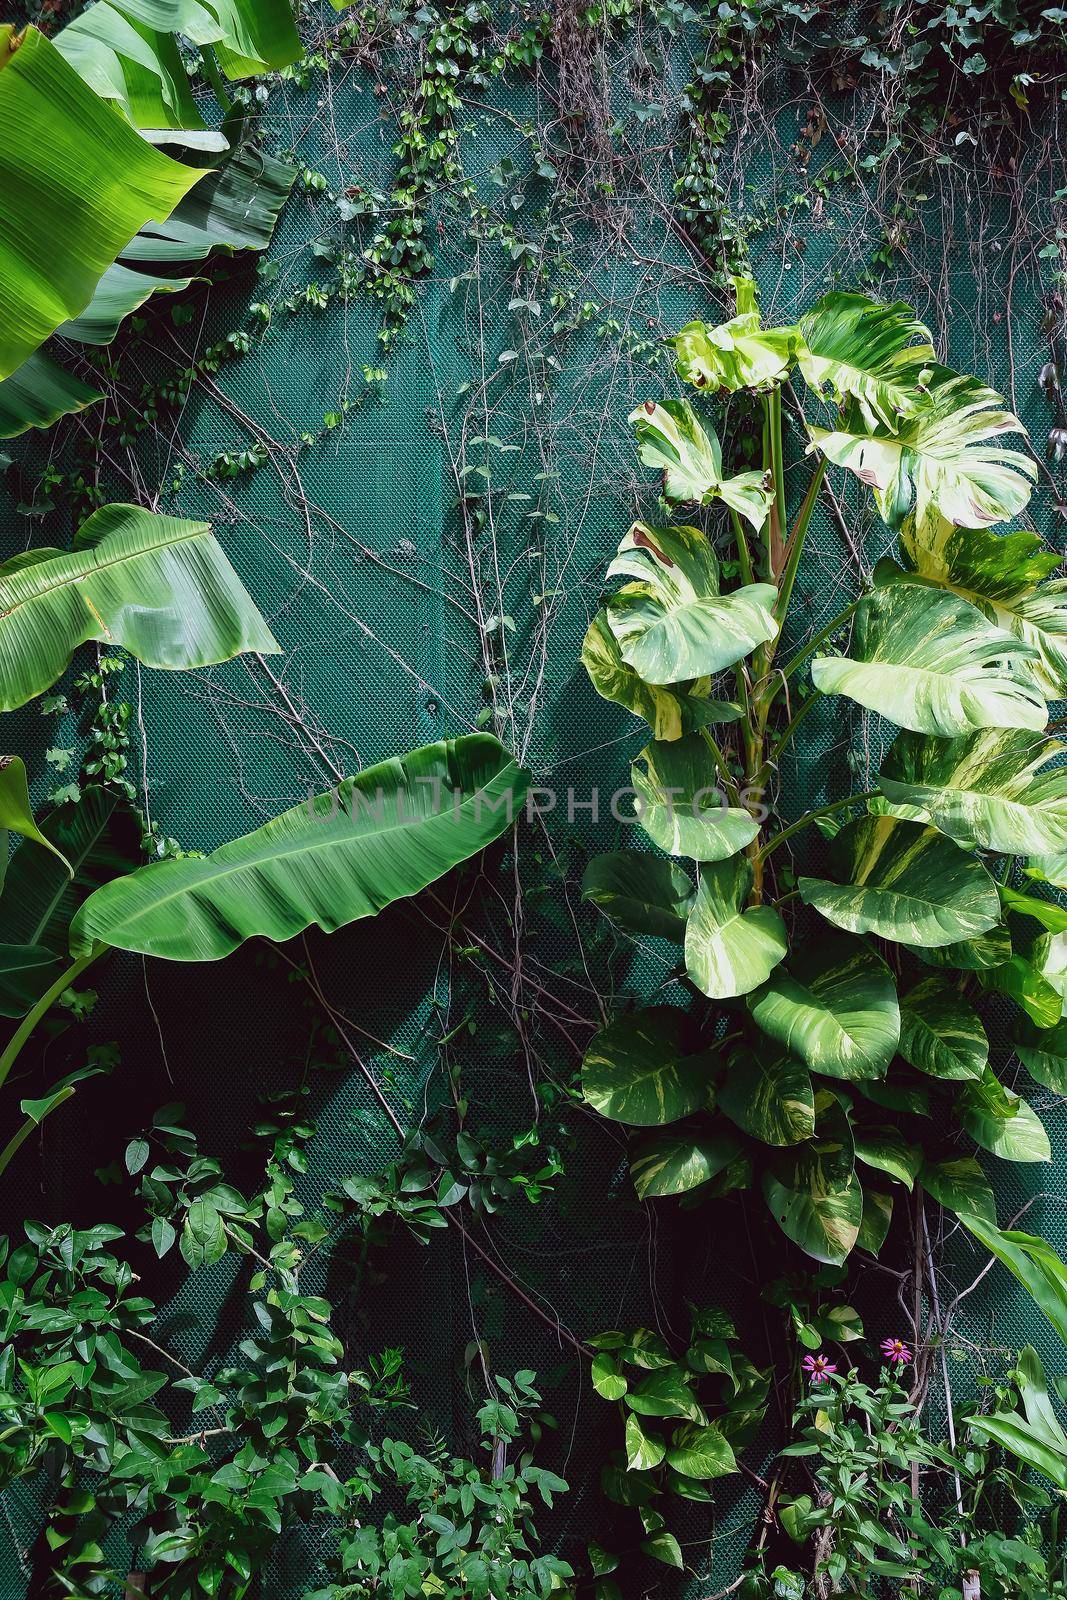 Vertical garden with tropical green leaf. Nature background